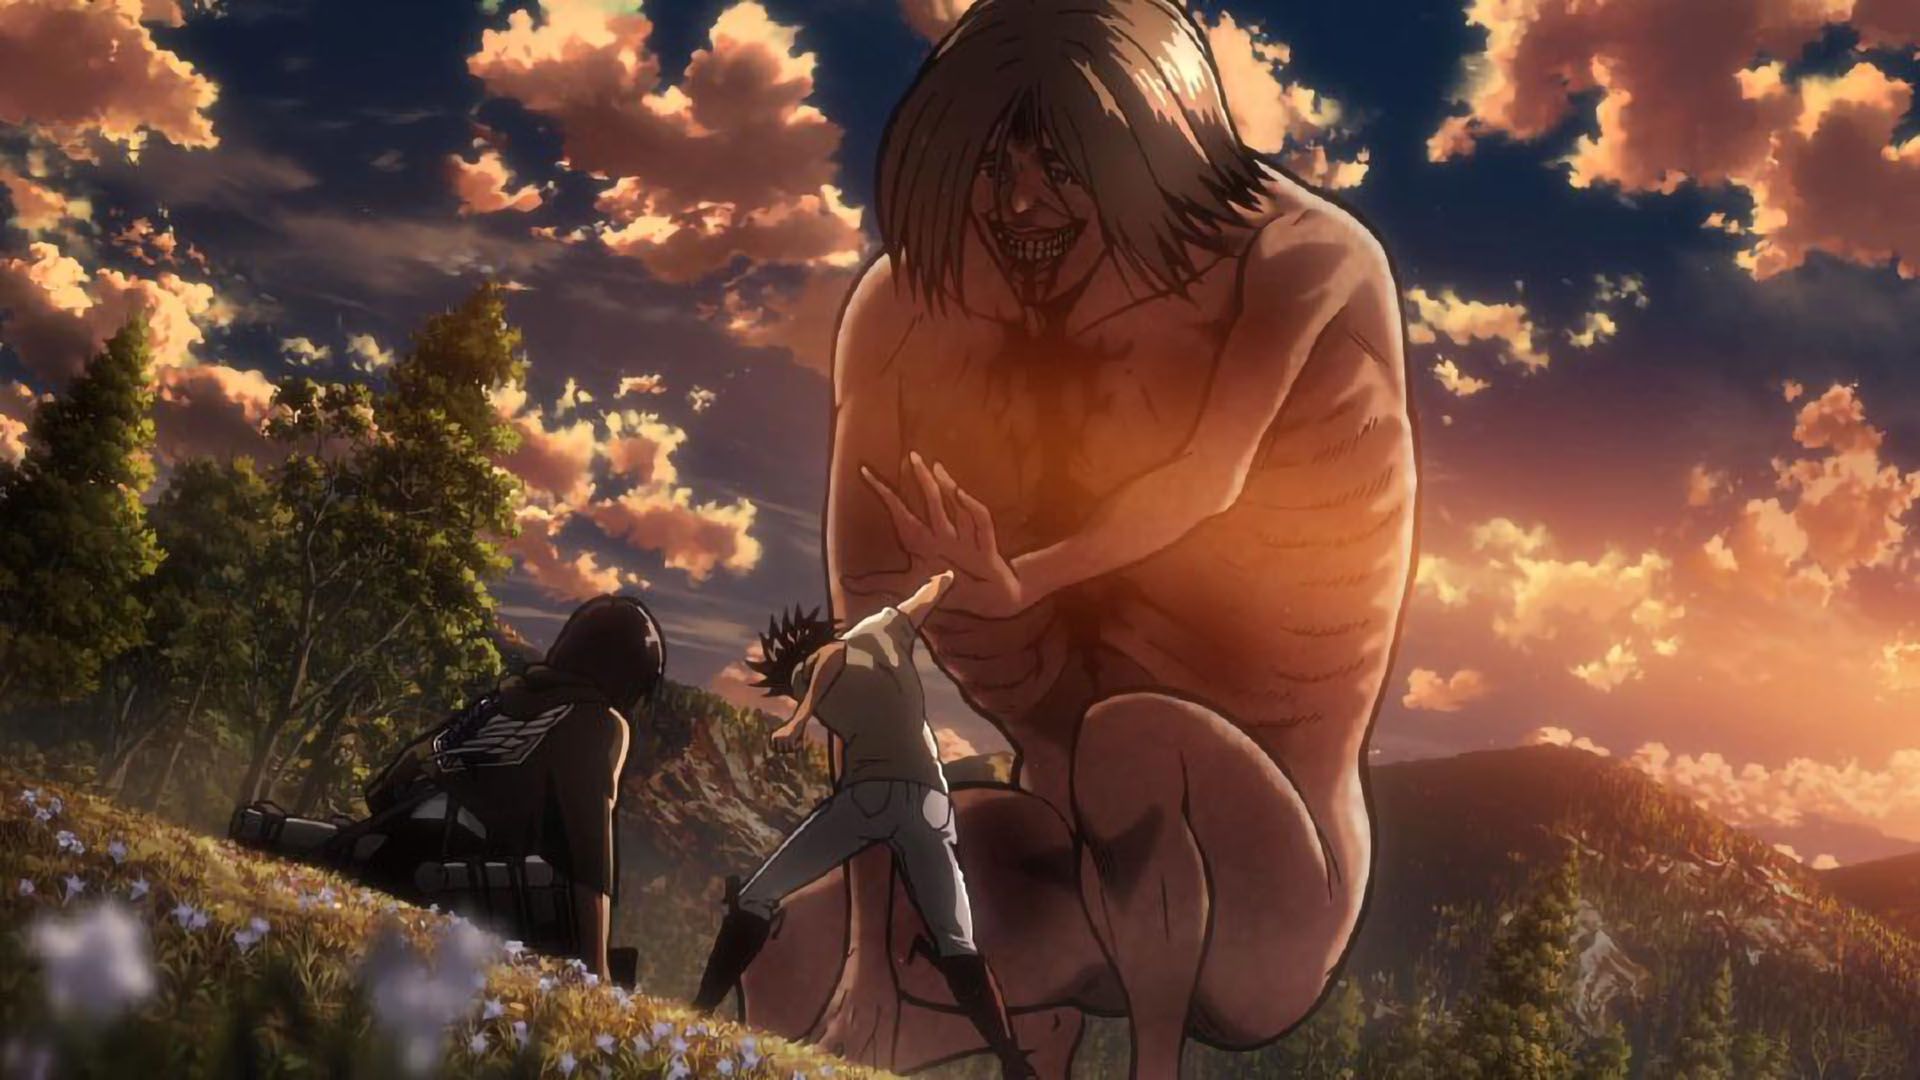 Grisha and his smiling sister  Attack on titan anime, Attack on titan,  Attack on titan season